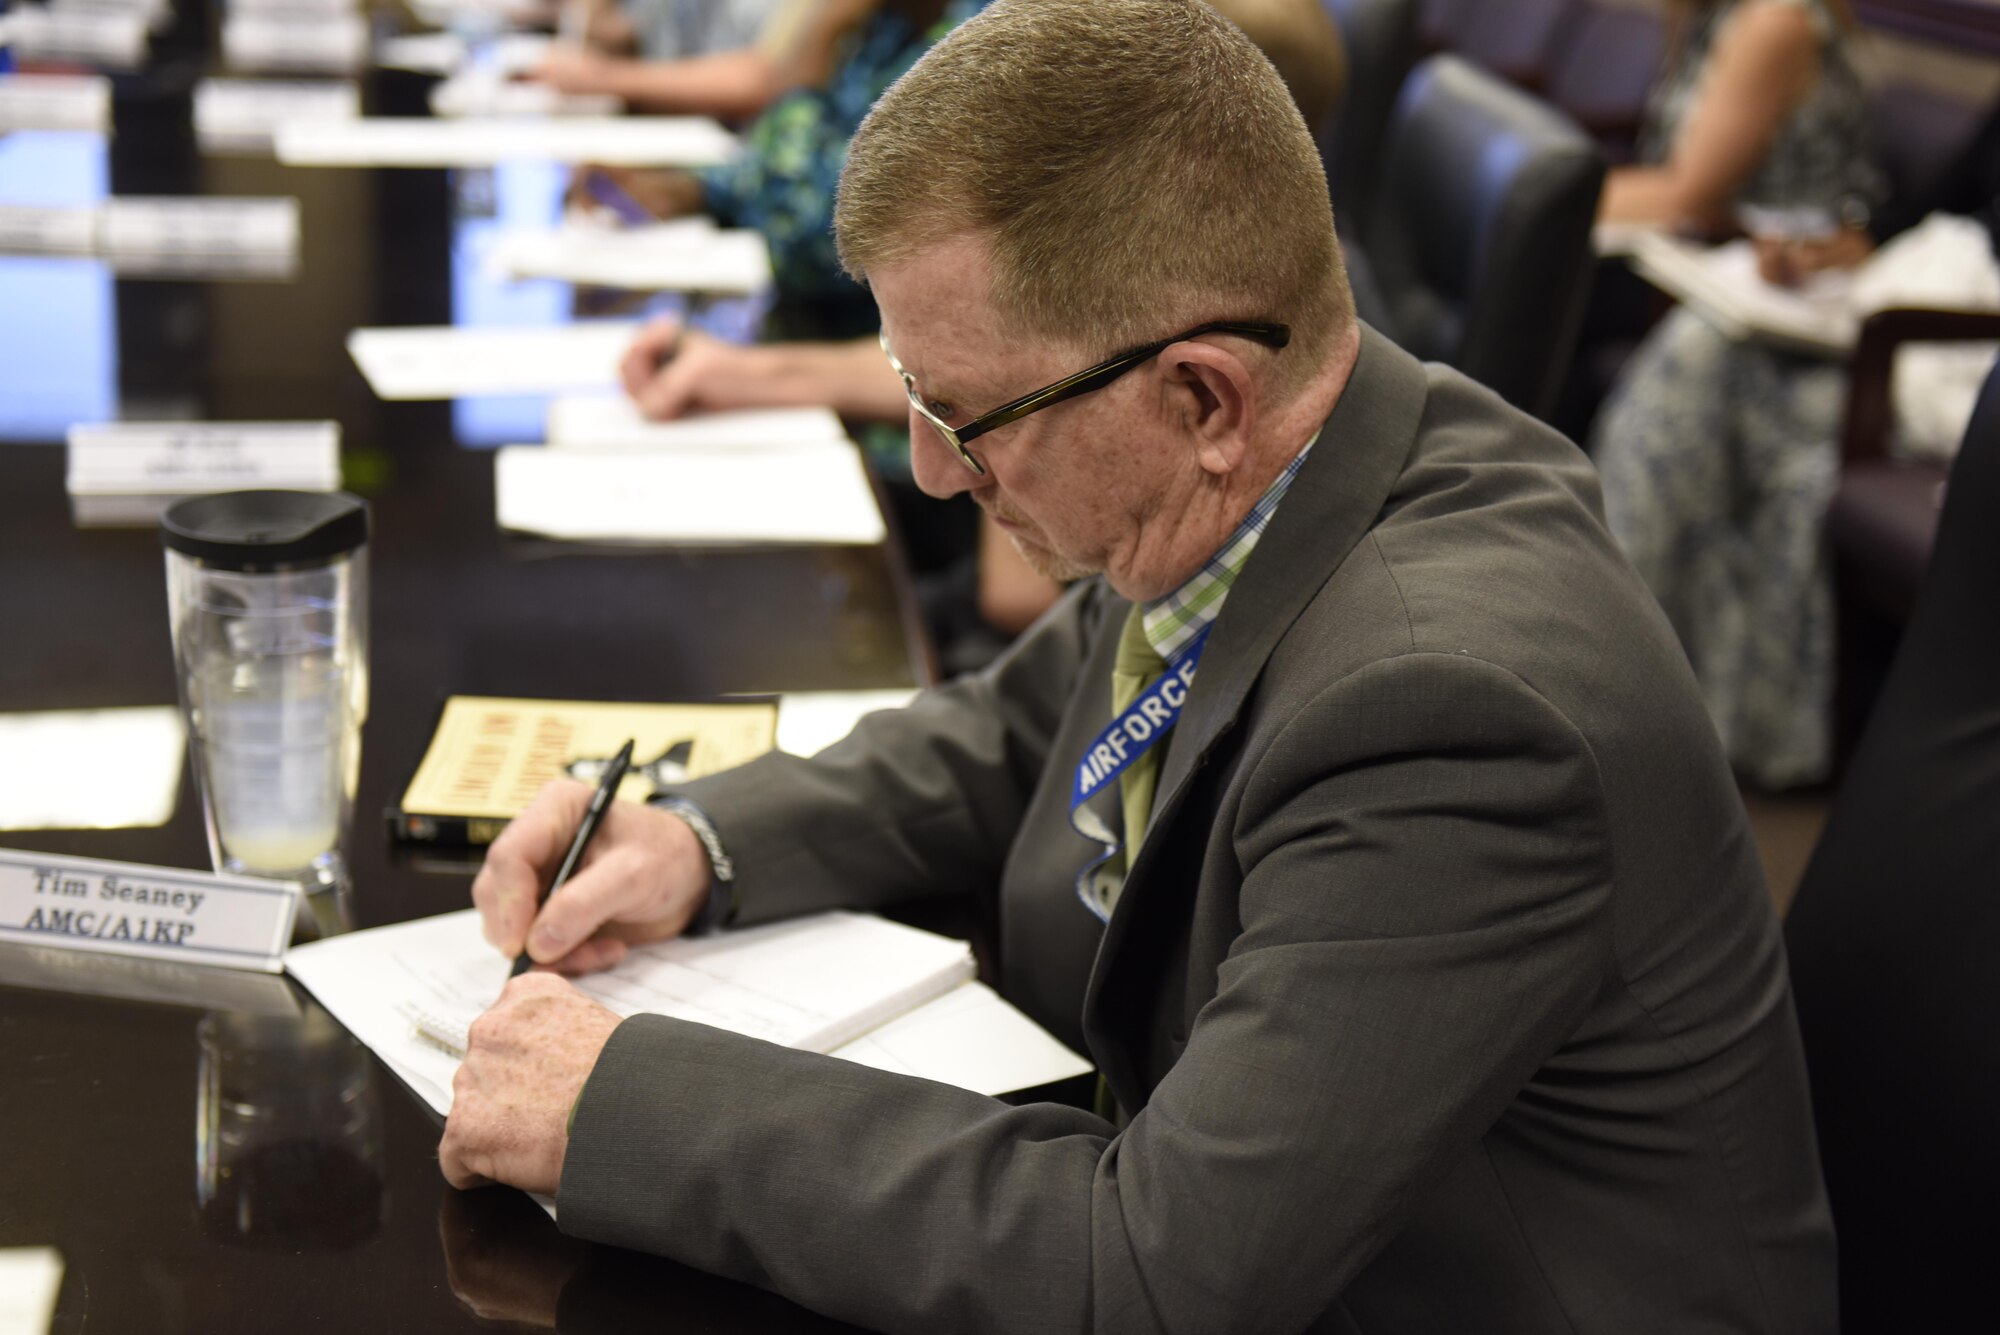 Tim Seaney, Air Mobility Command’s Management Level Support division chief, takes notes during the Emotional Intelligence course August 15, 2017